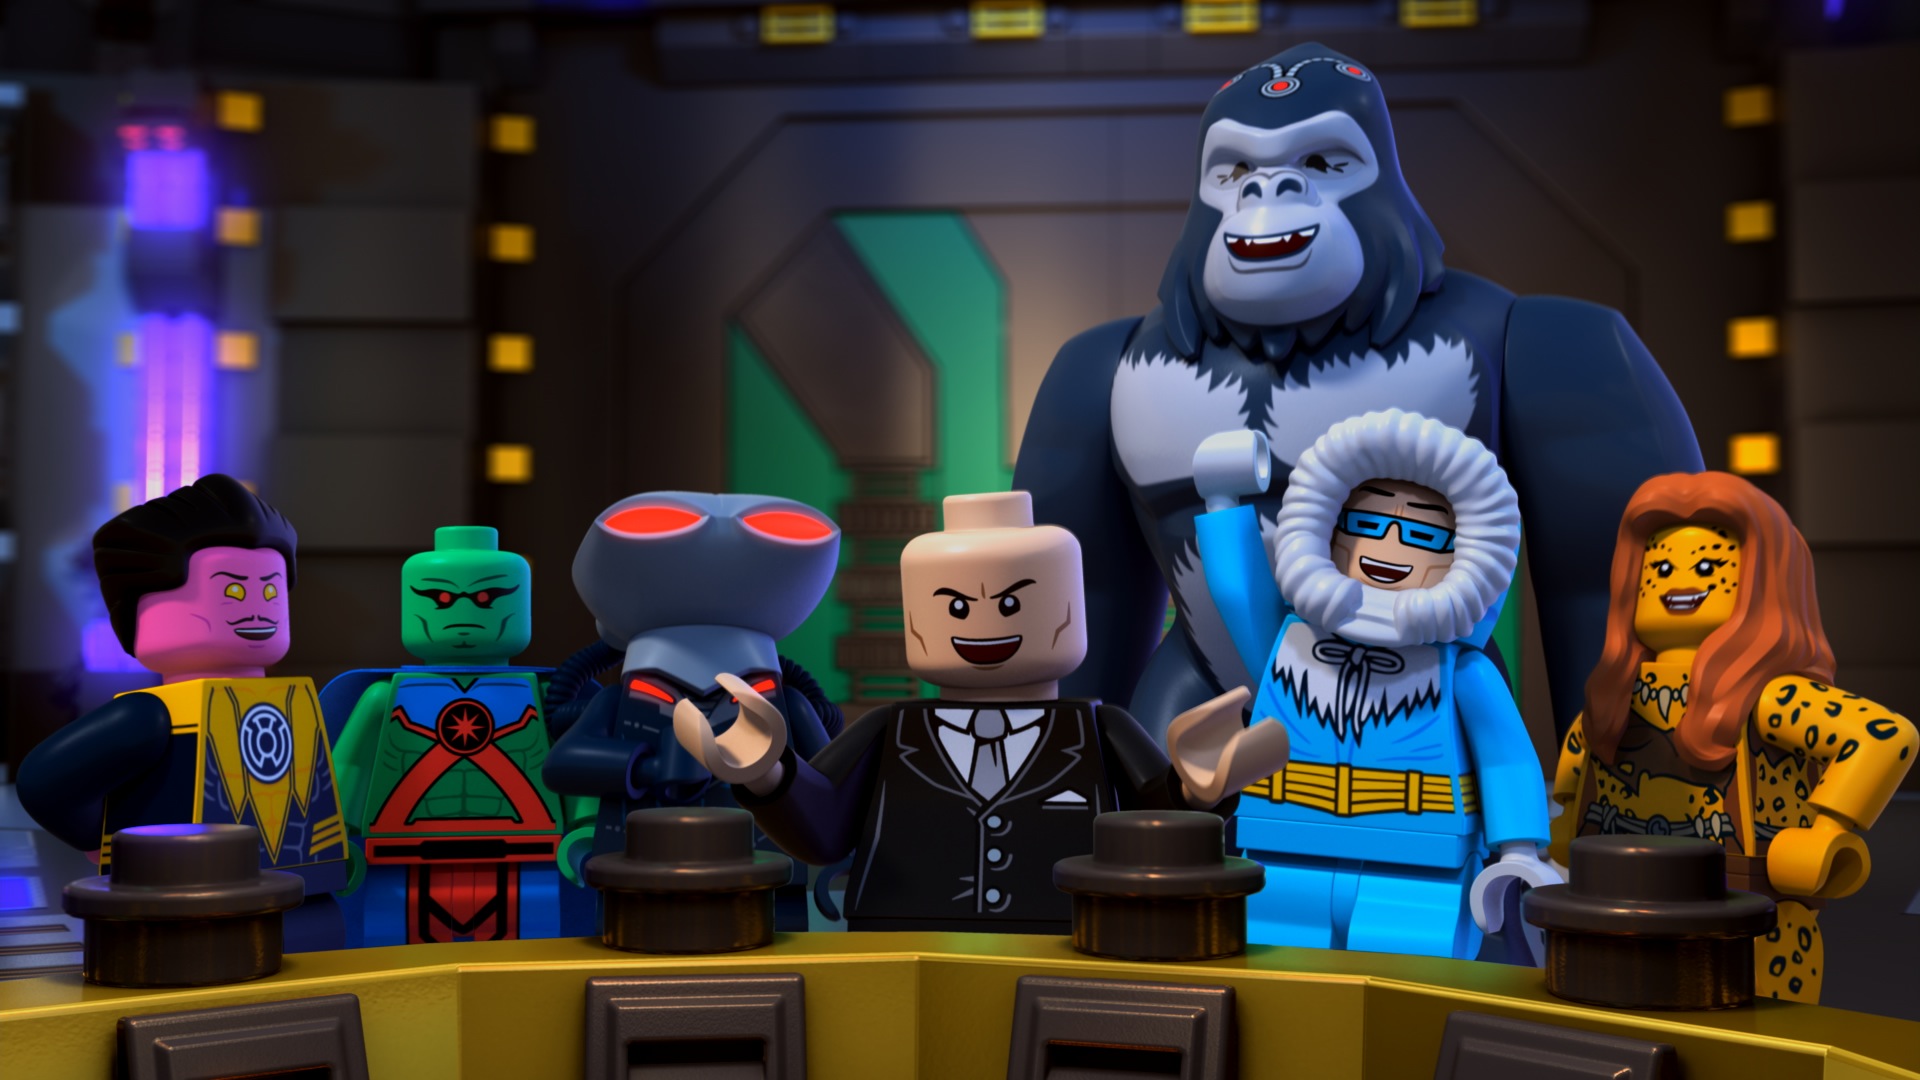 LEGO DC Super Heroes: Justice League - Attack Of The Legion Of Doom! #1